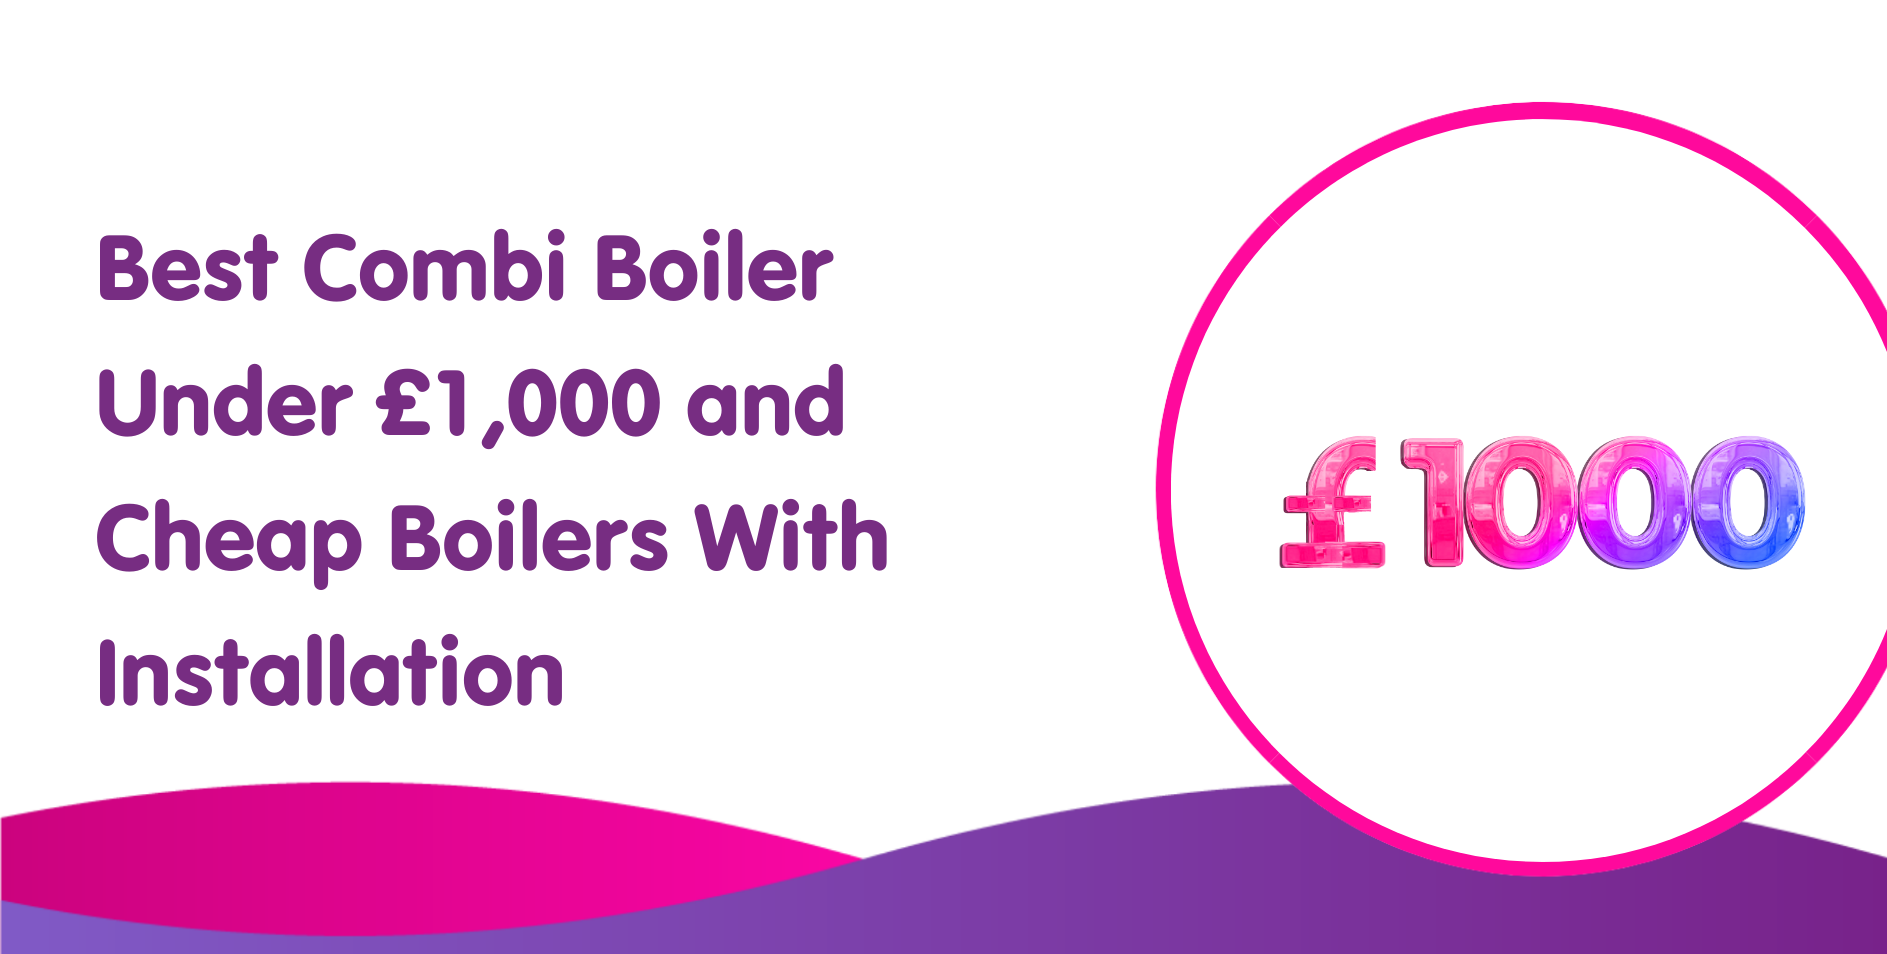 Best Combi Boiler Under £1,000 & Cheap Boilers  With Installation